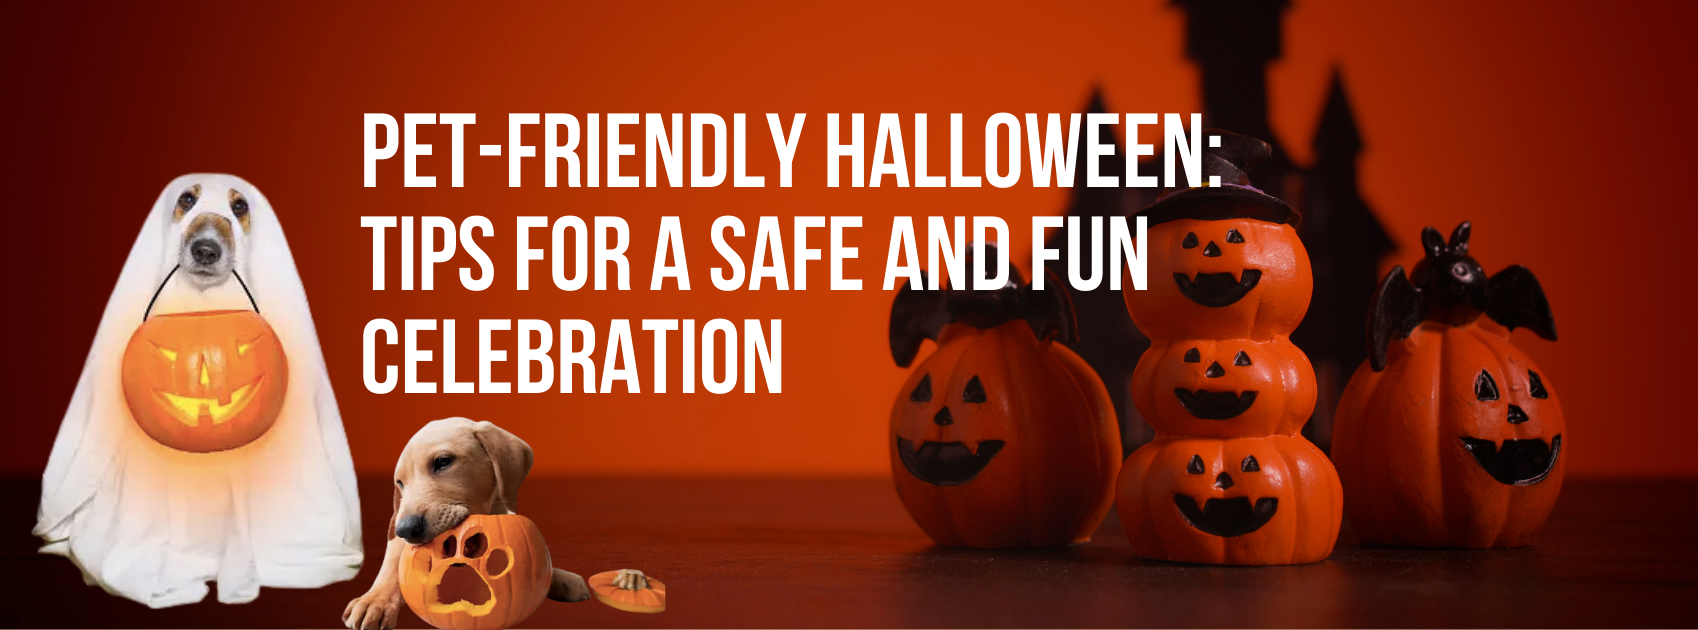 Pet-friendly Halloween: Tips for a safe and fun celebration